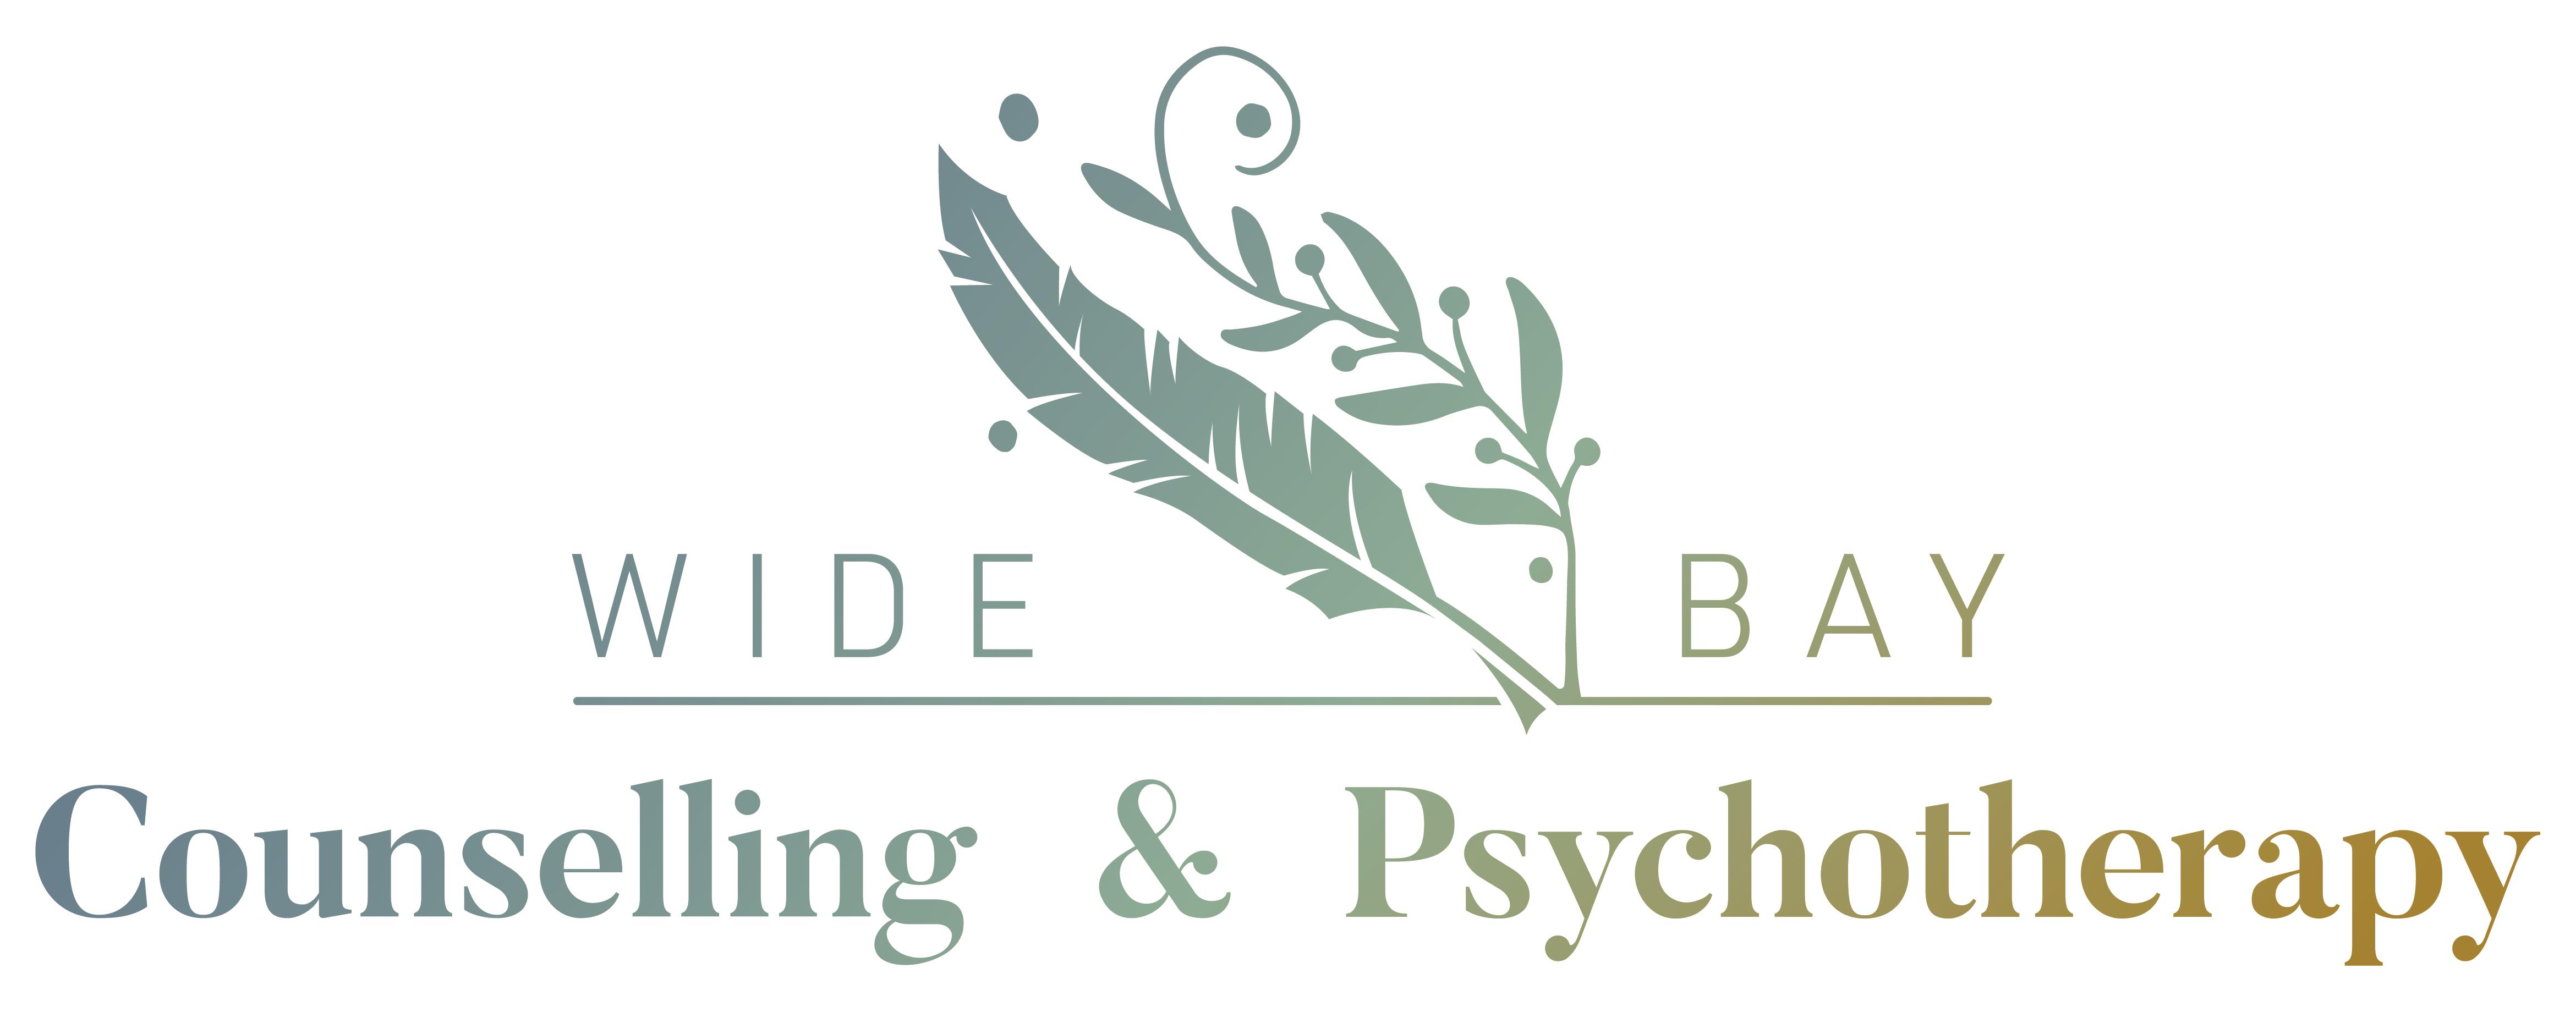 Wide Bay Counselling & Psychotherapy